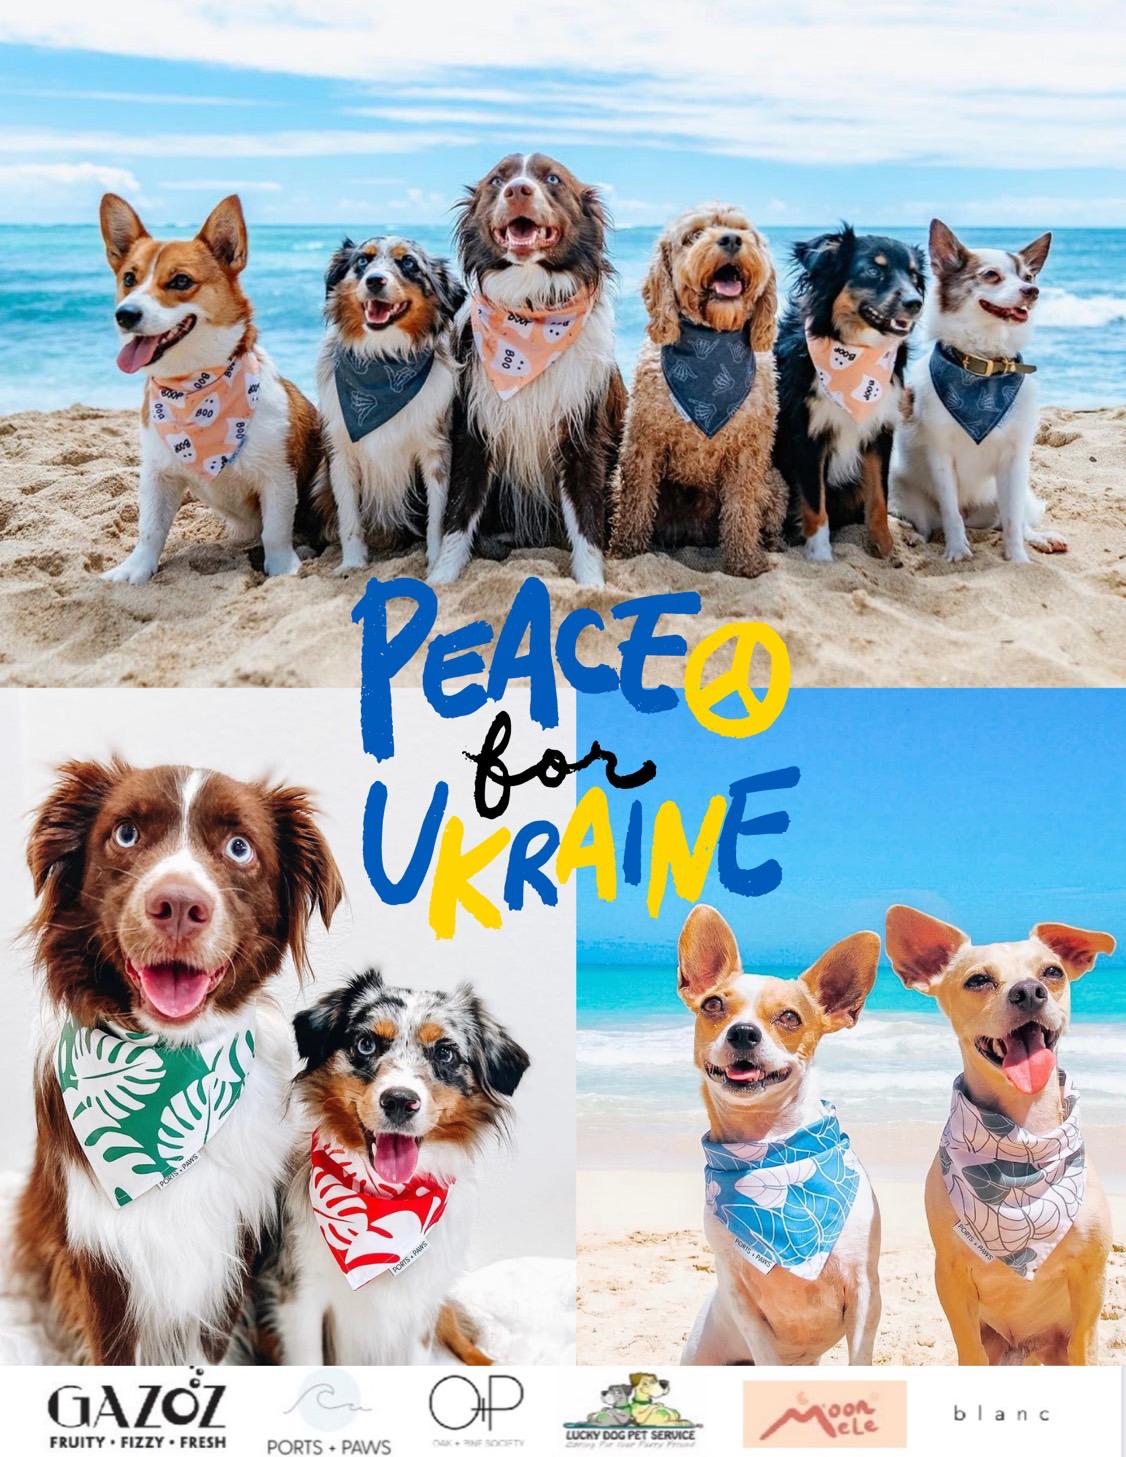 Ukraine Doggy Rescue and Support Charity Event at the beautiful beach house! Tickets in Honolulu, HI, United States